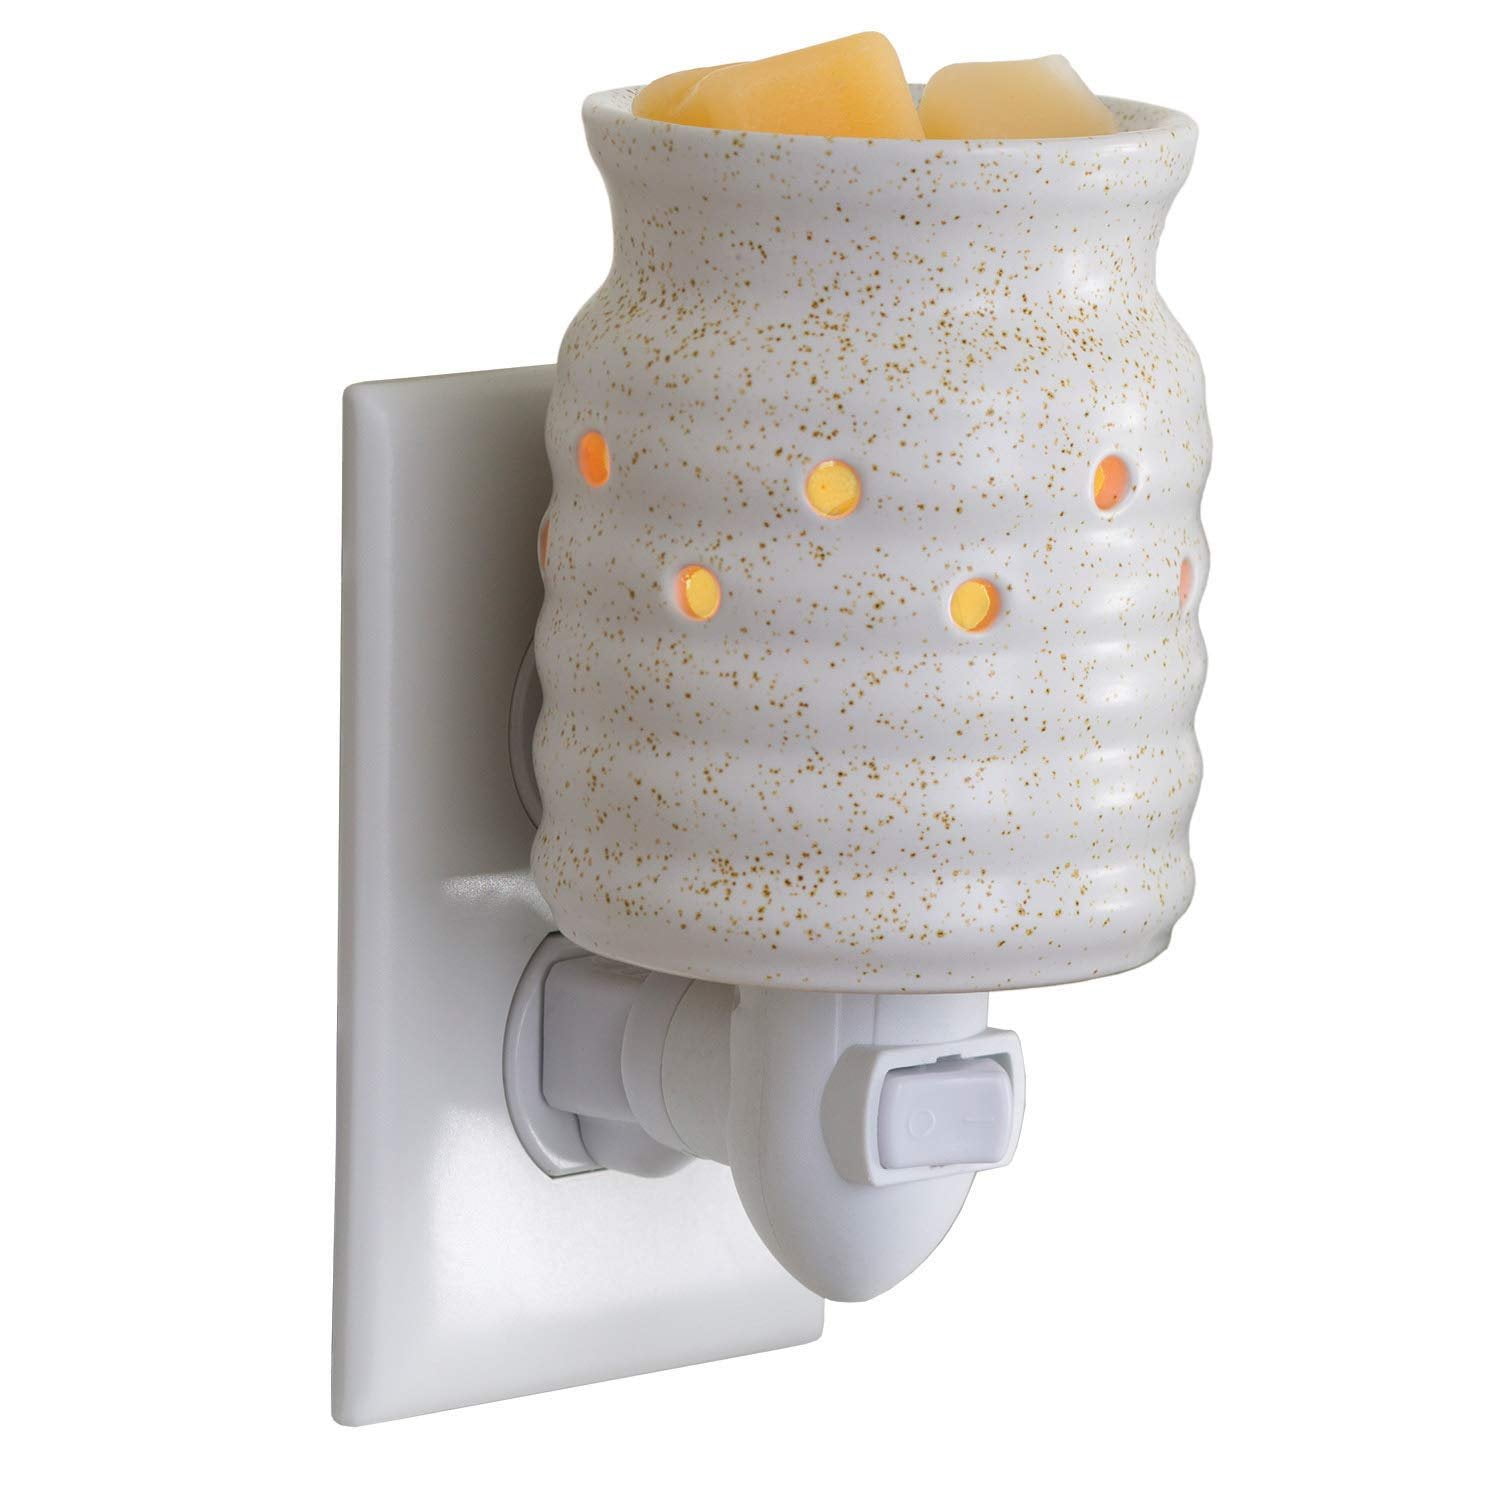 Proverbs 31 She is More Precious Electric Plug-in Outlet Wax and Oil Warmer 